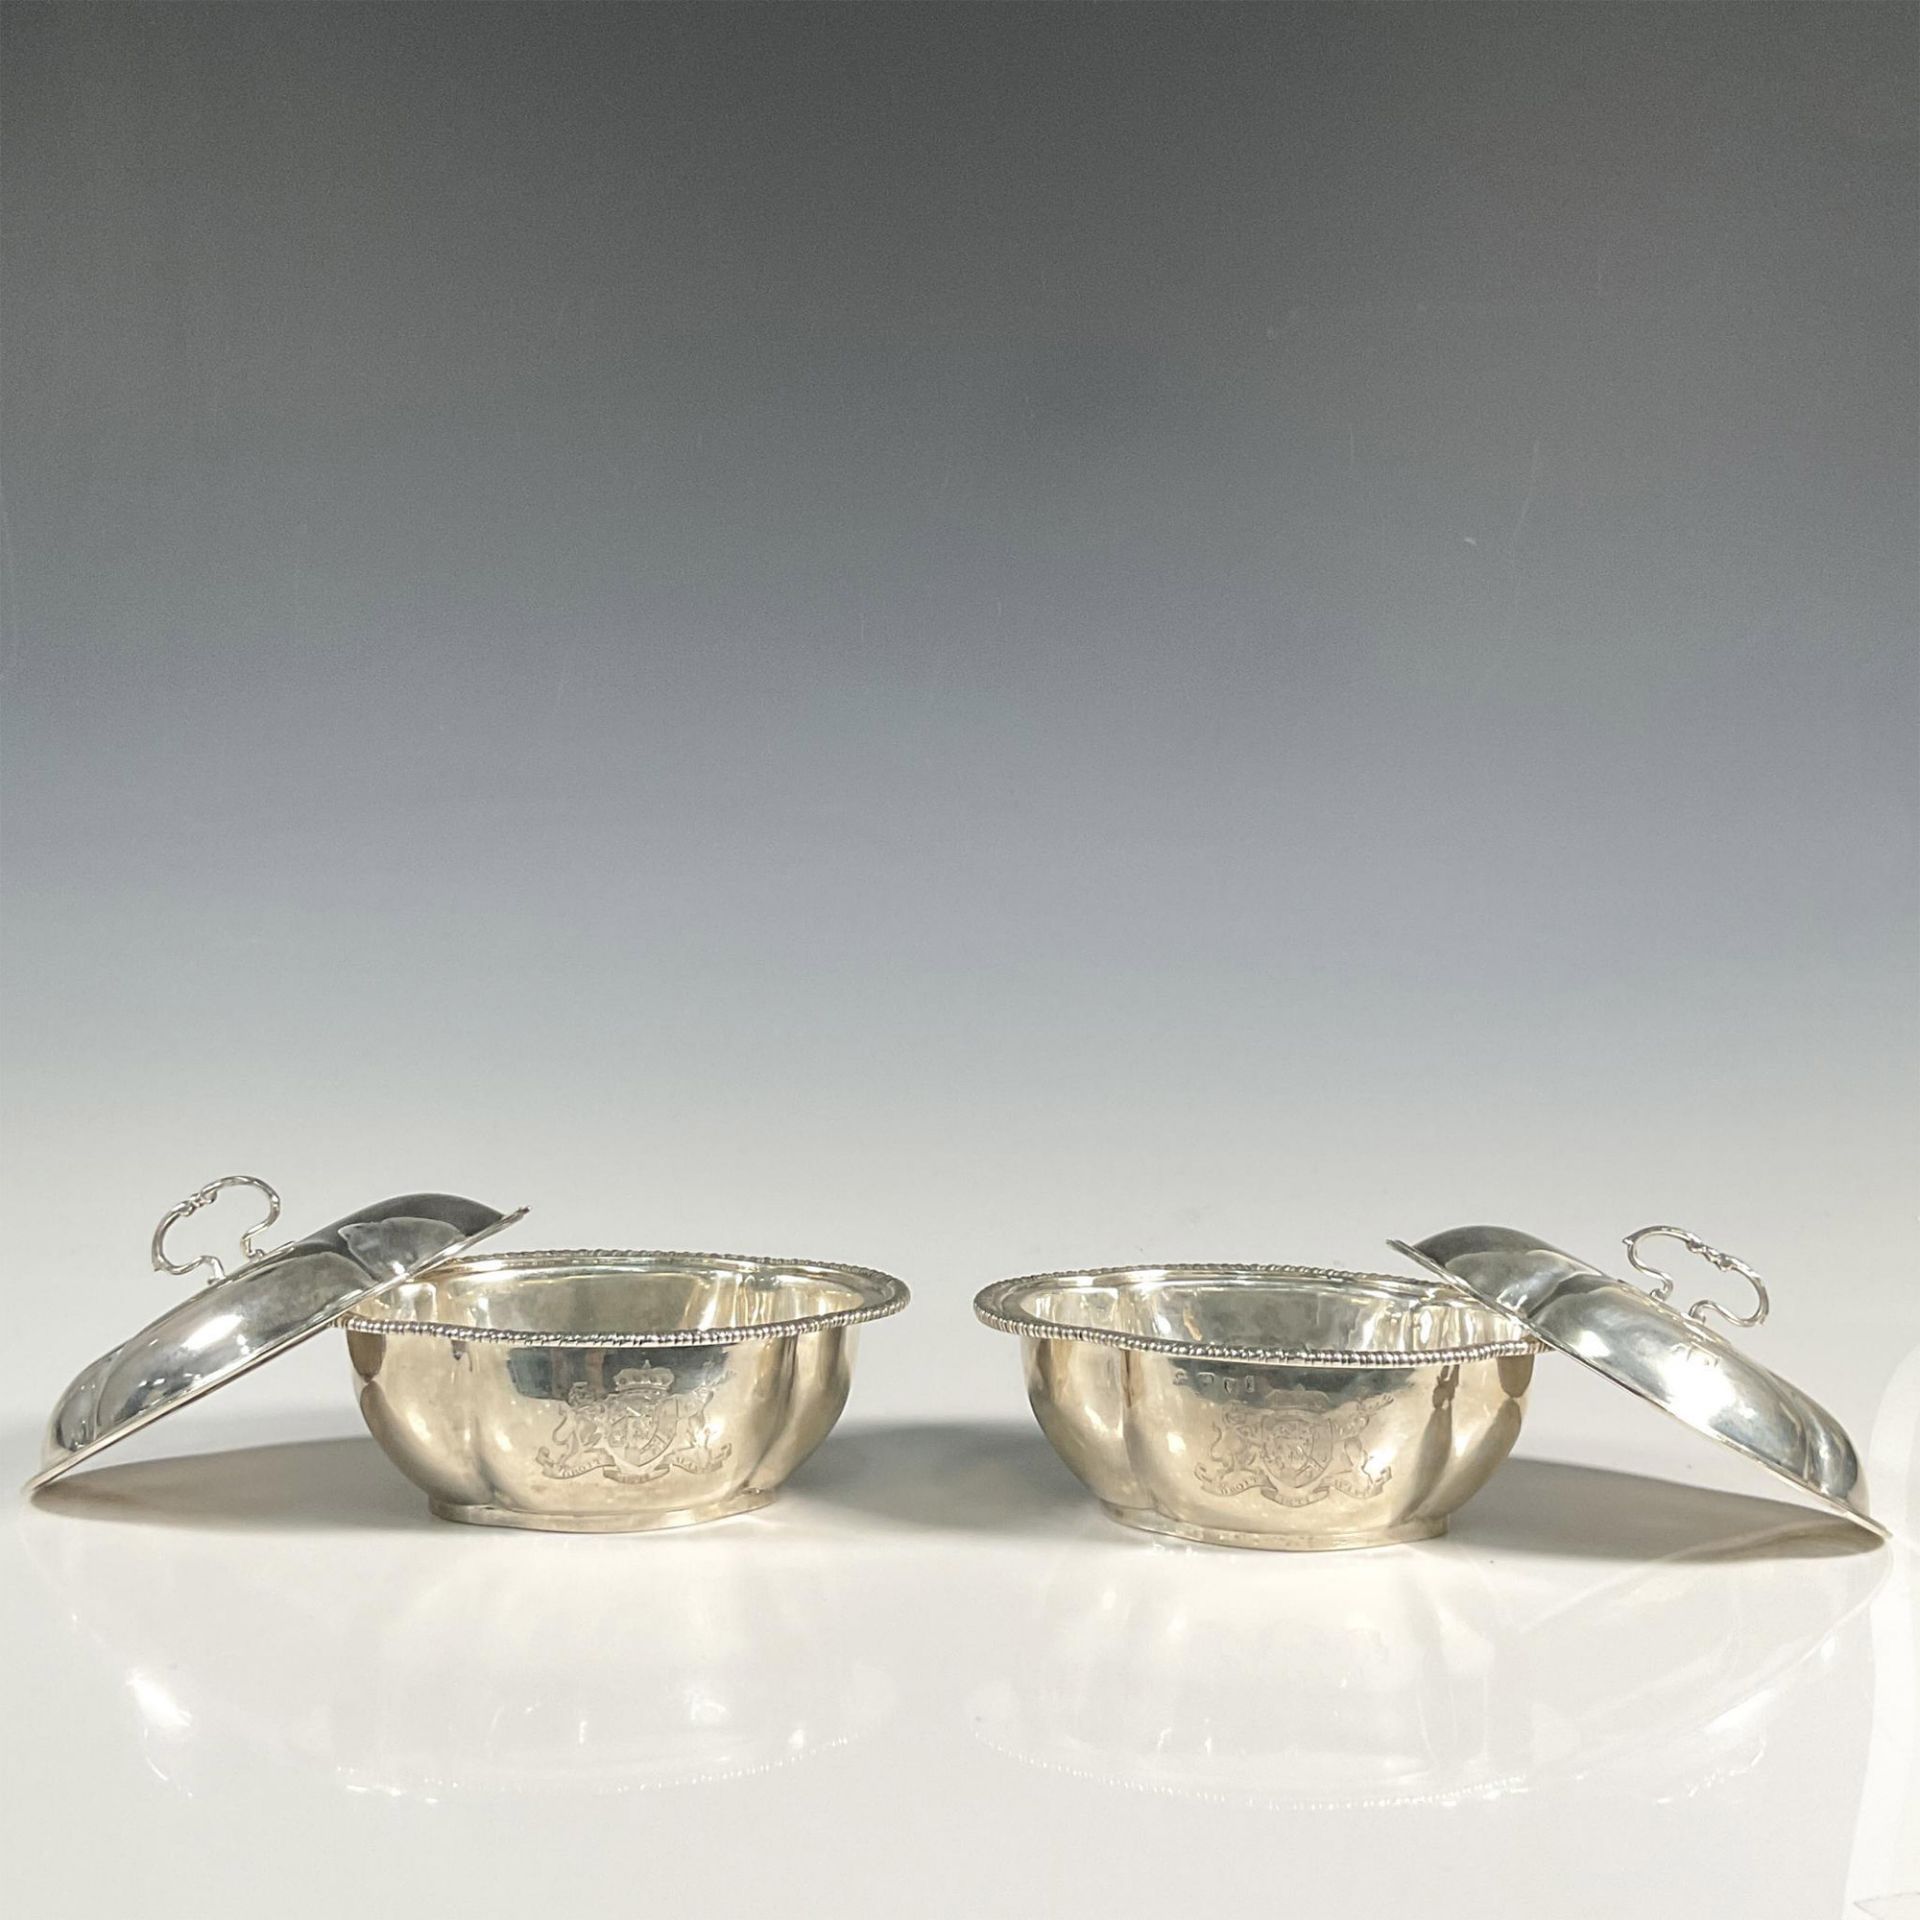 Pair of Thomas Heming George I Silver Covered Saucers - Image 5 of 5